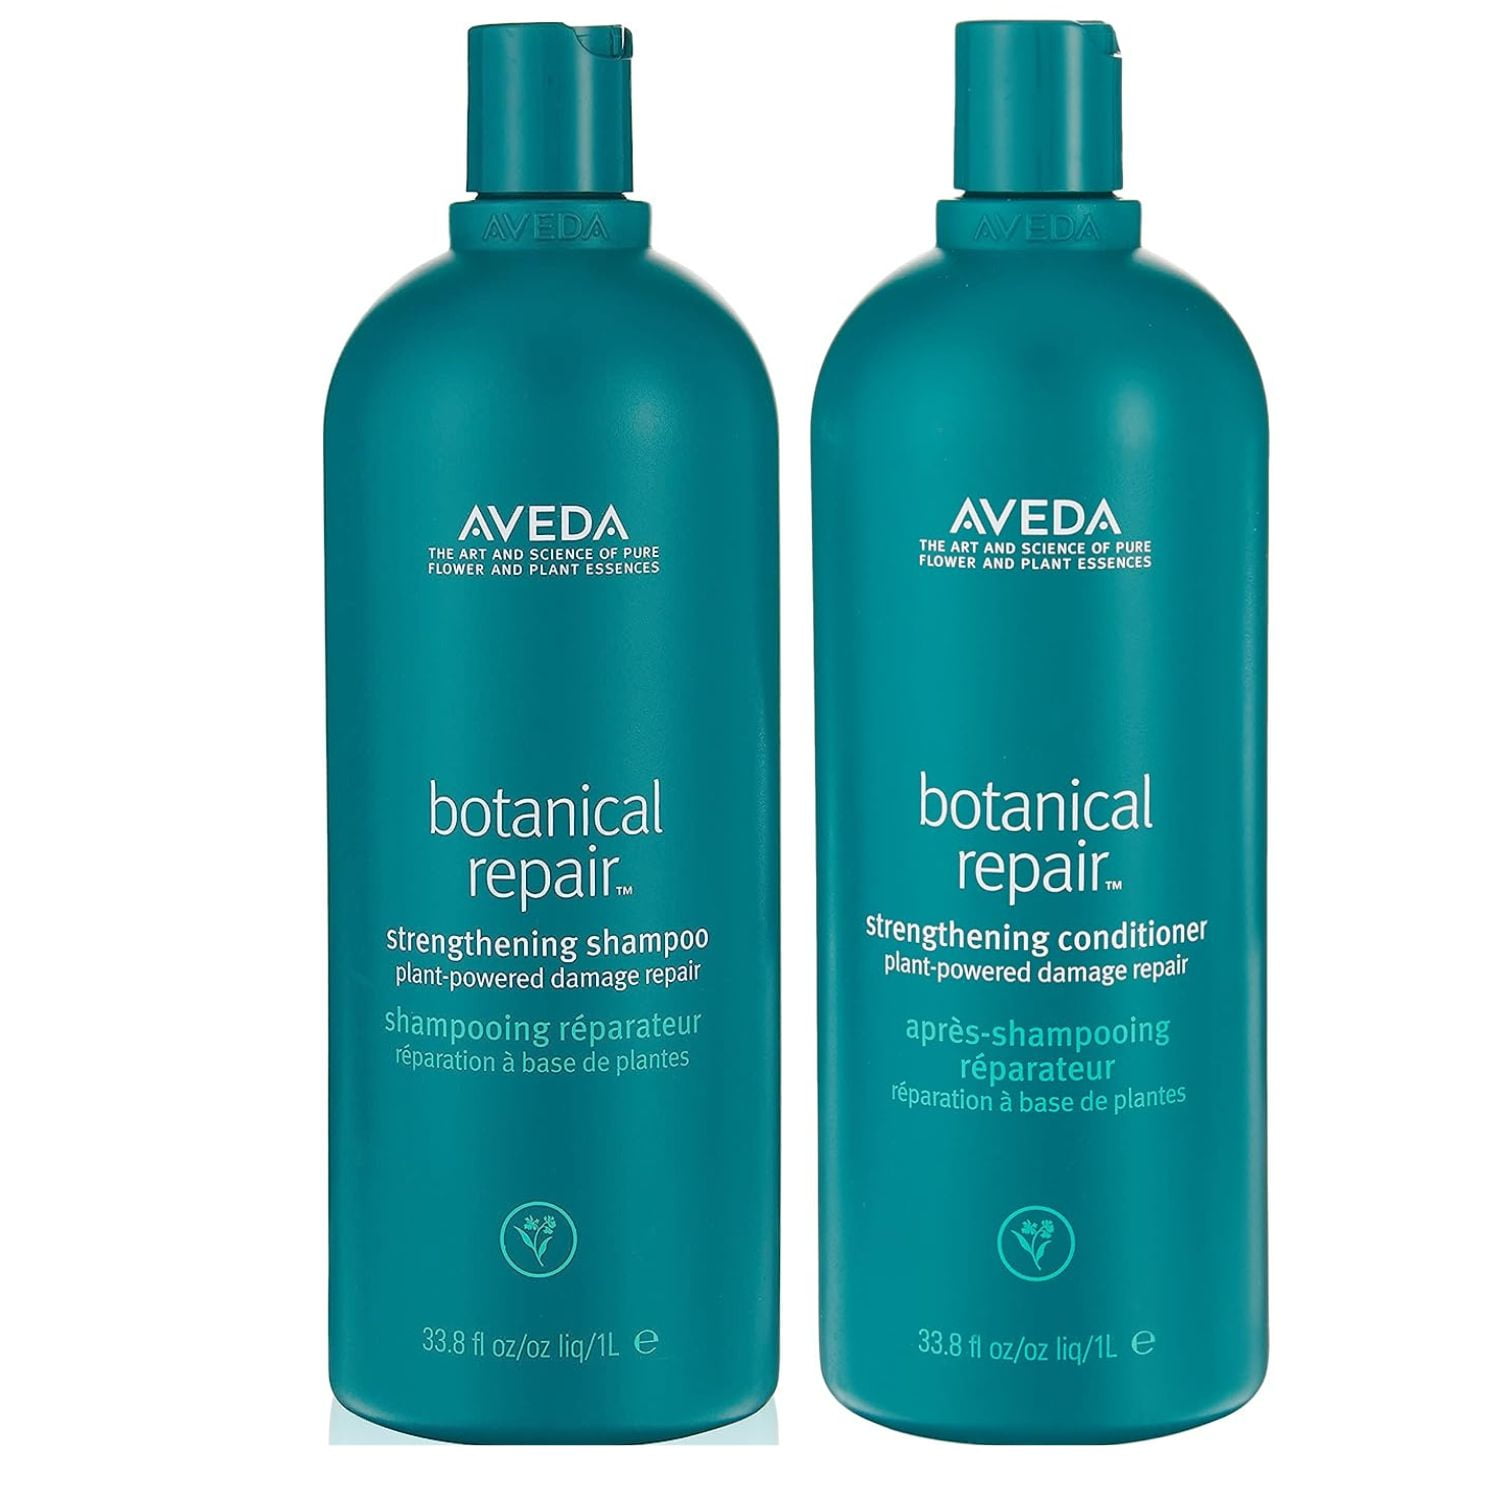 Find the Botanical Shampoo and Conditioner for You